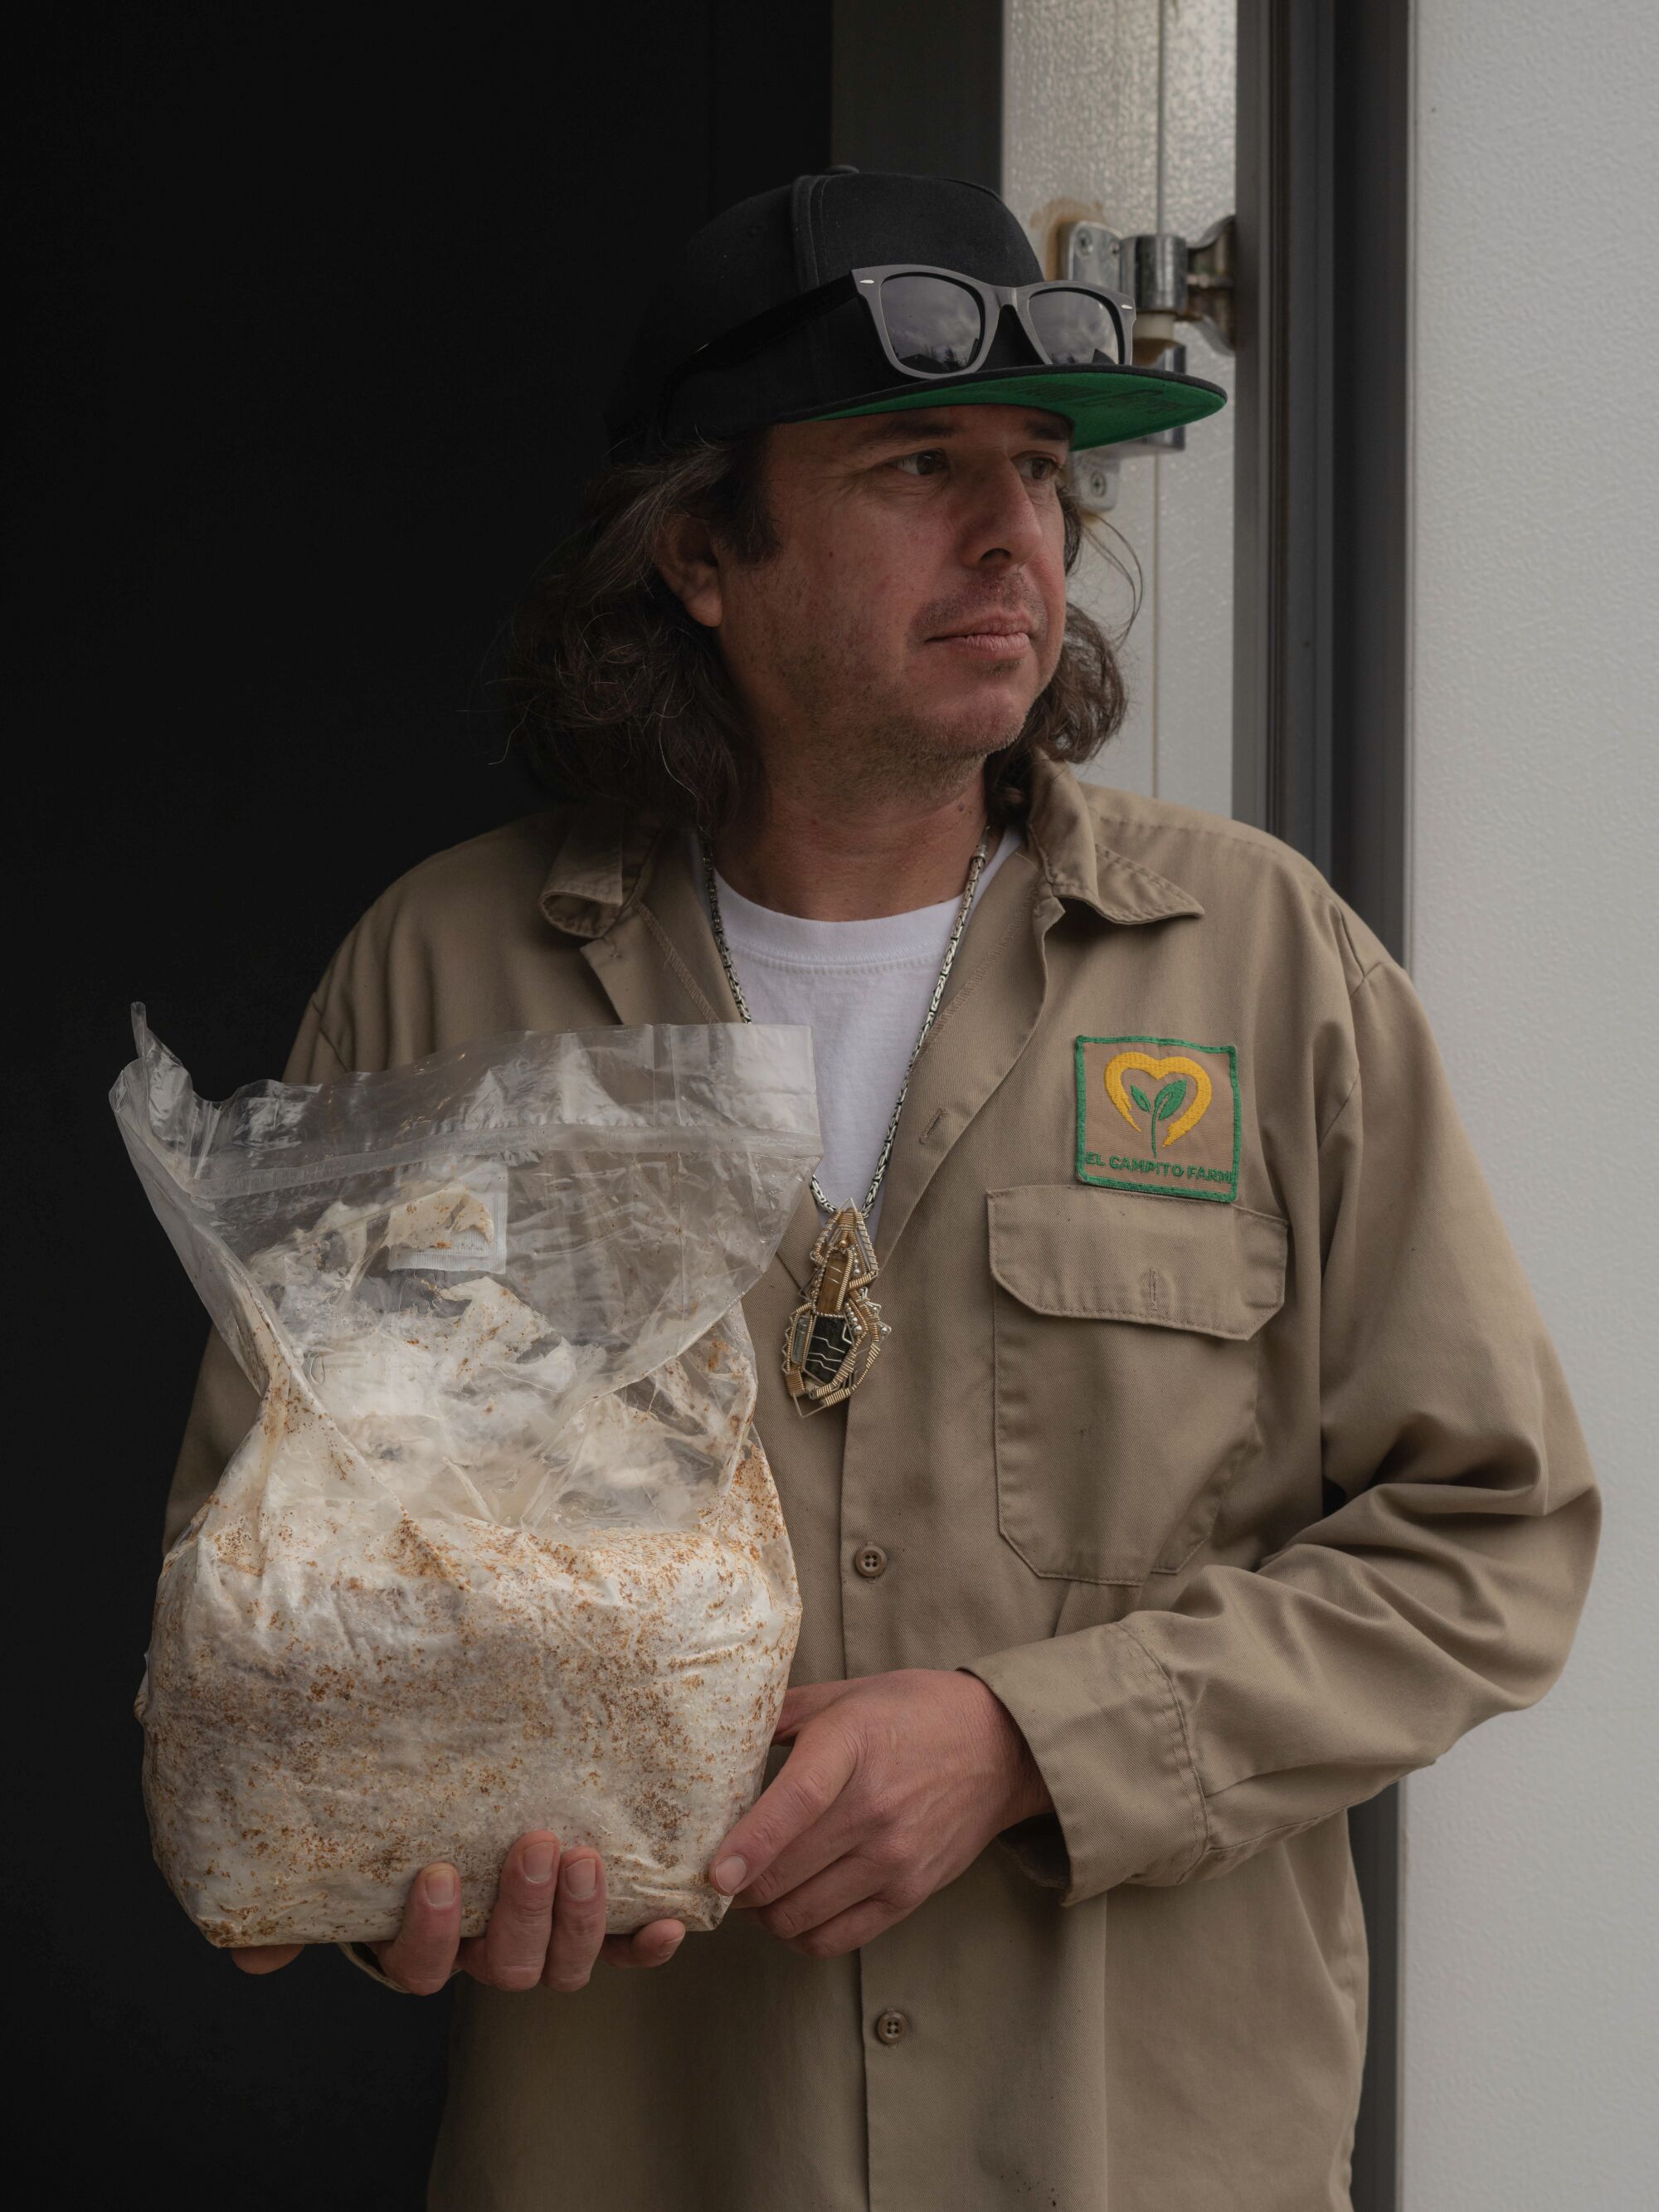 A man in sunglasses and a hat holding a big bag of mushrooms.